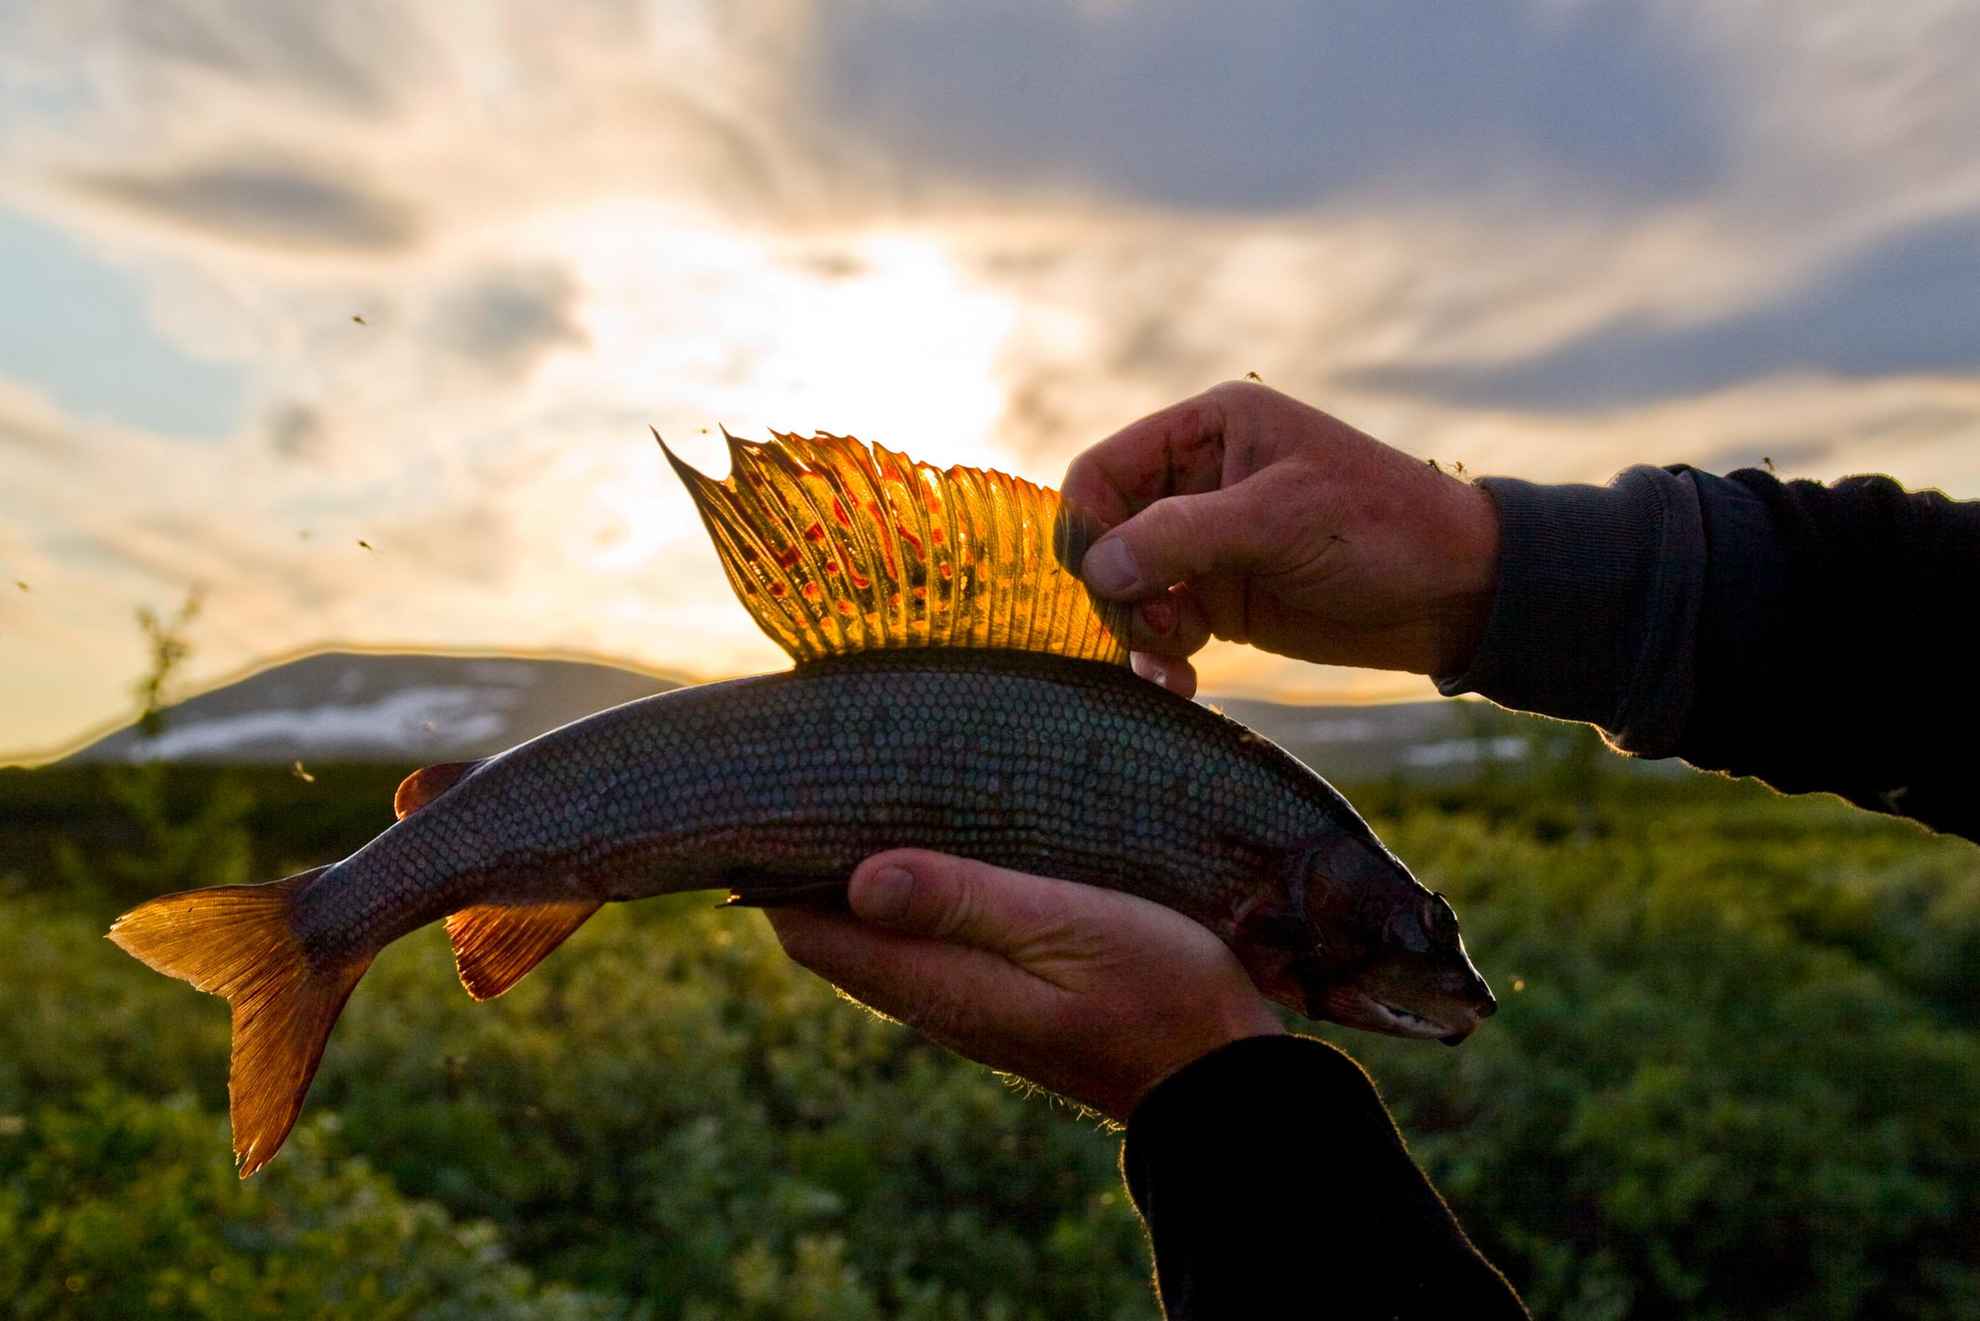 Two hands are holding up a trout fish against the setting sun with the forest and the mountains in the background.